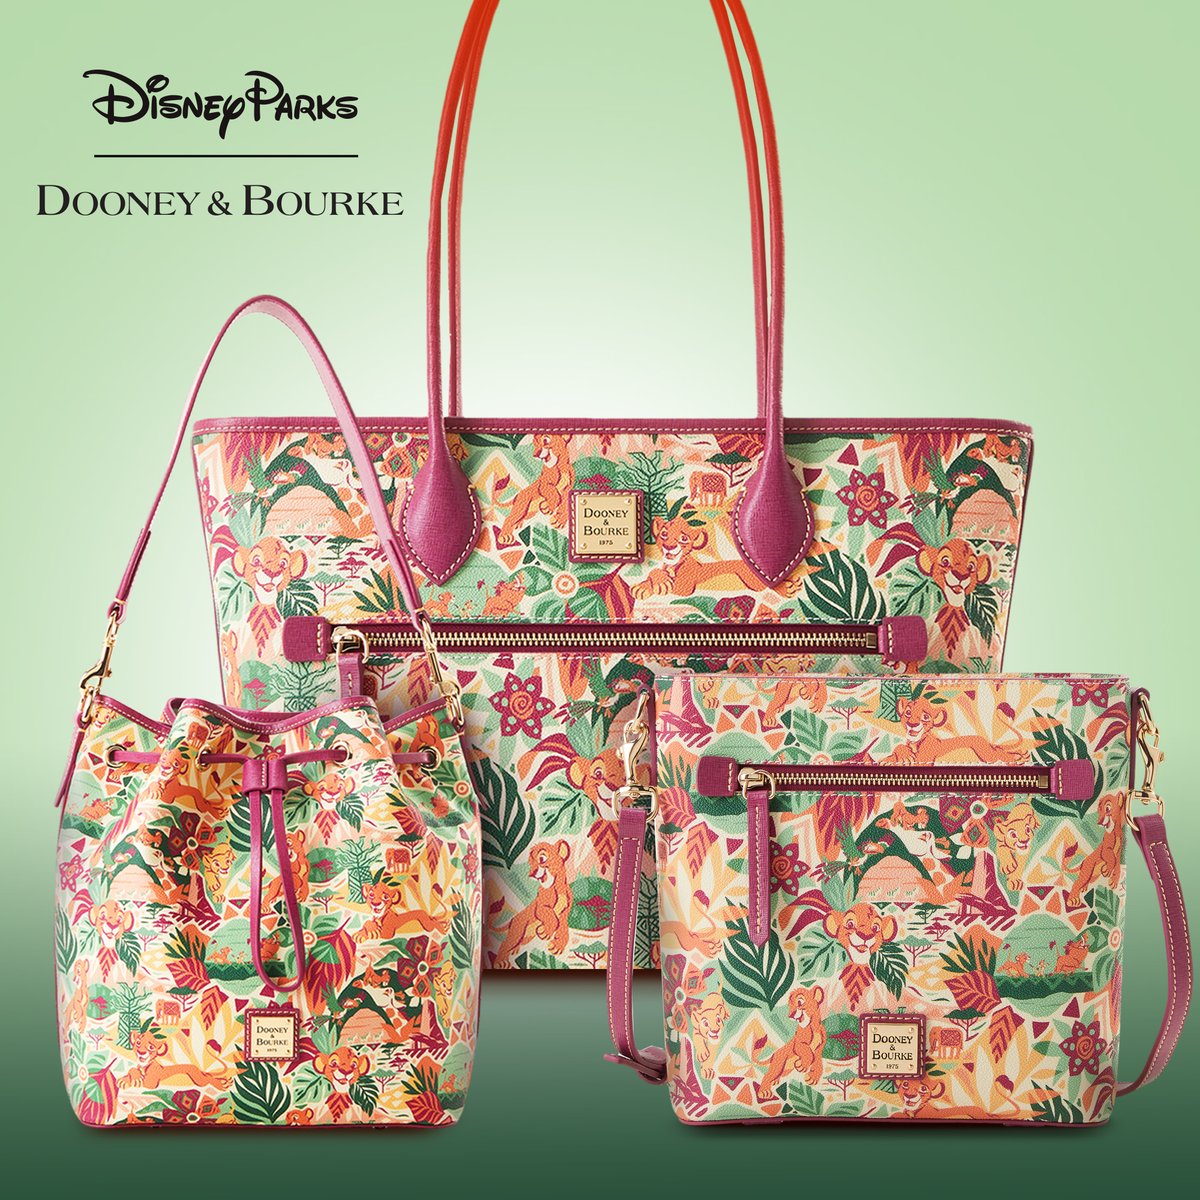 Show off your problem-free philosophy wherever you go with The Lion King Dooney & Bourke Collection. di.sn/6013OC0wd